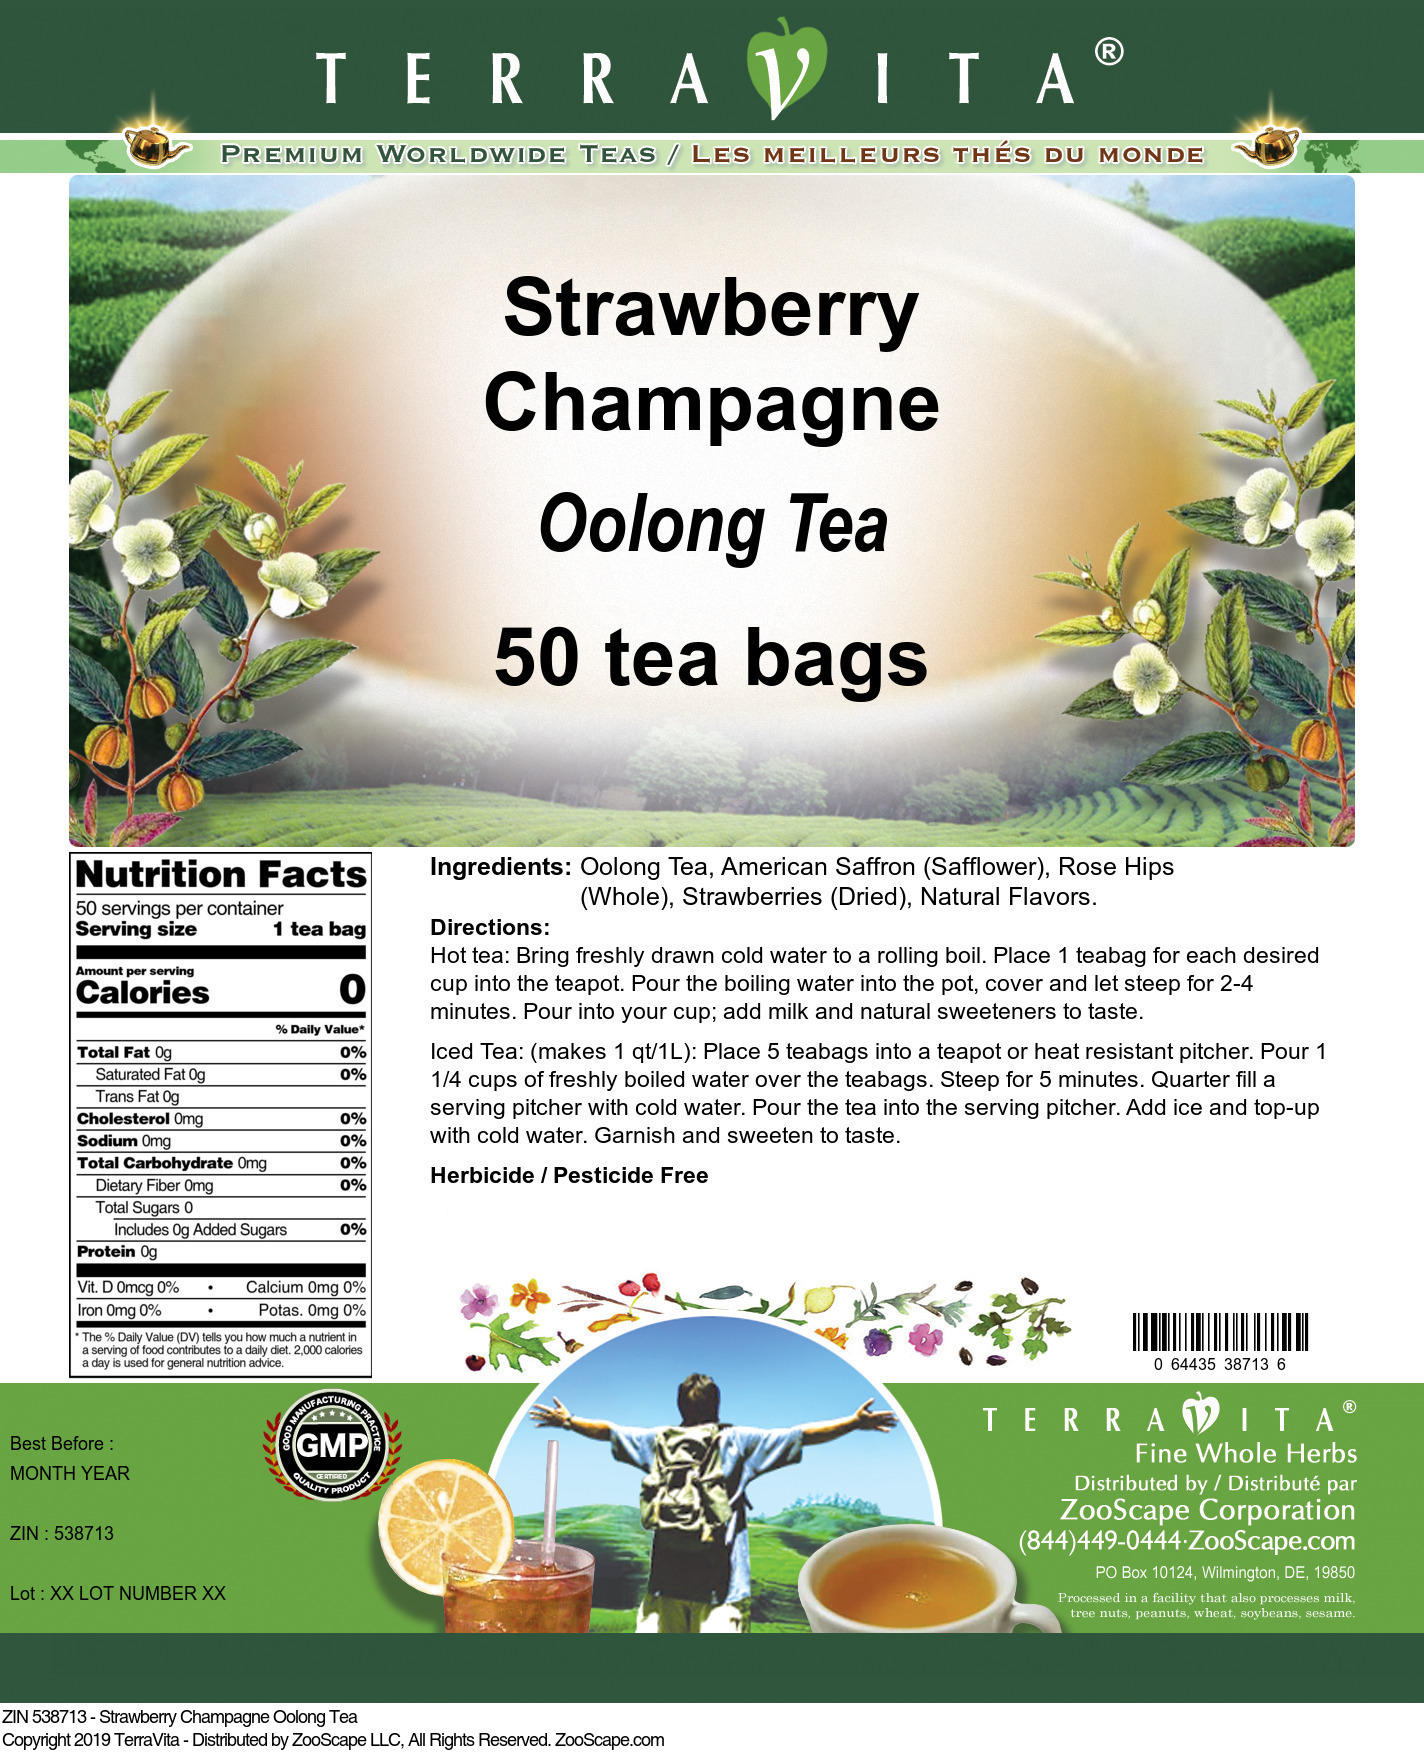 Strawberry Champagne Oolong Tea - Label